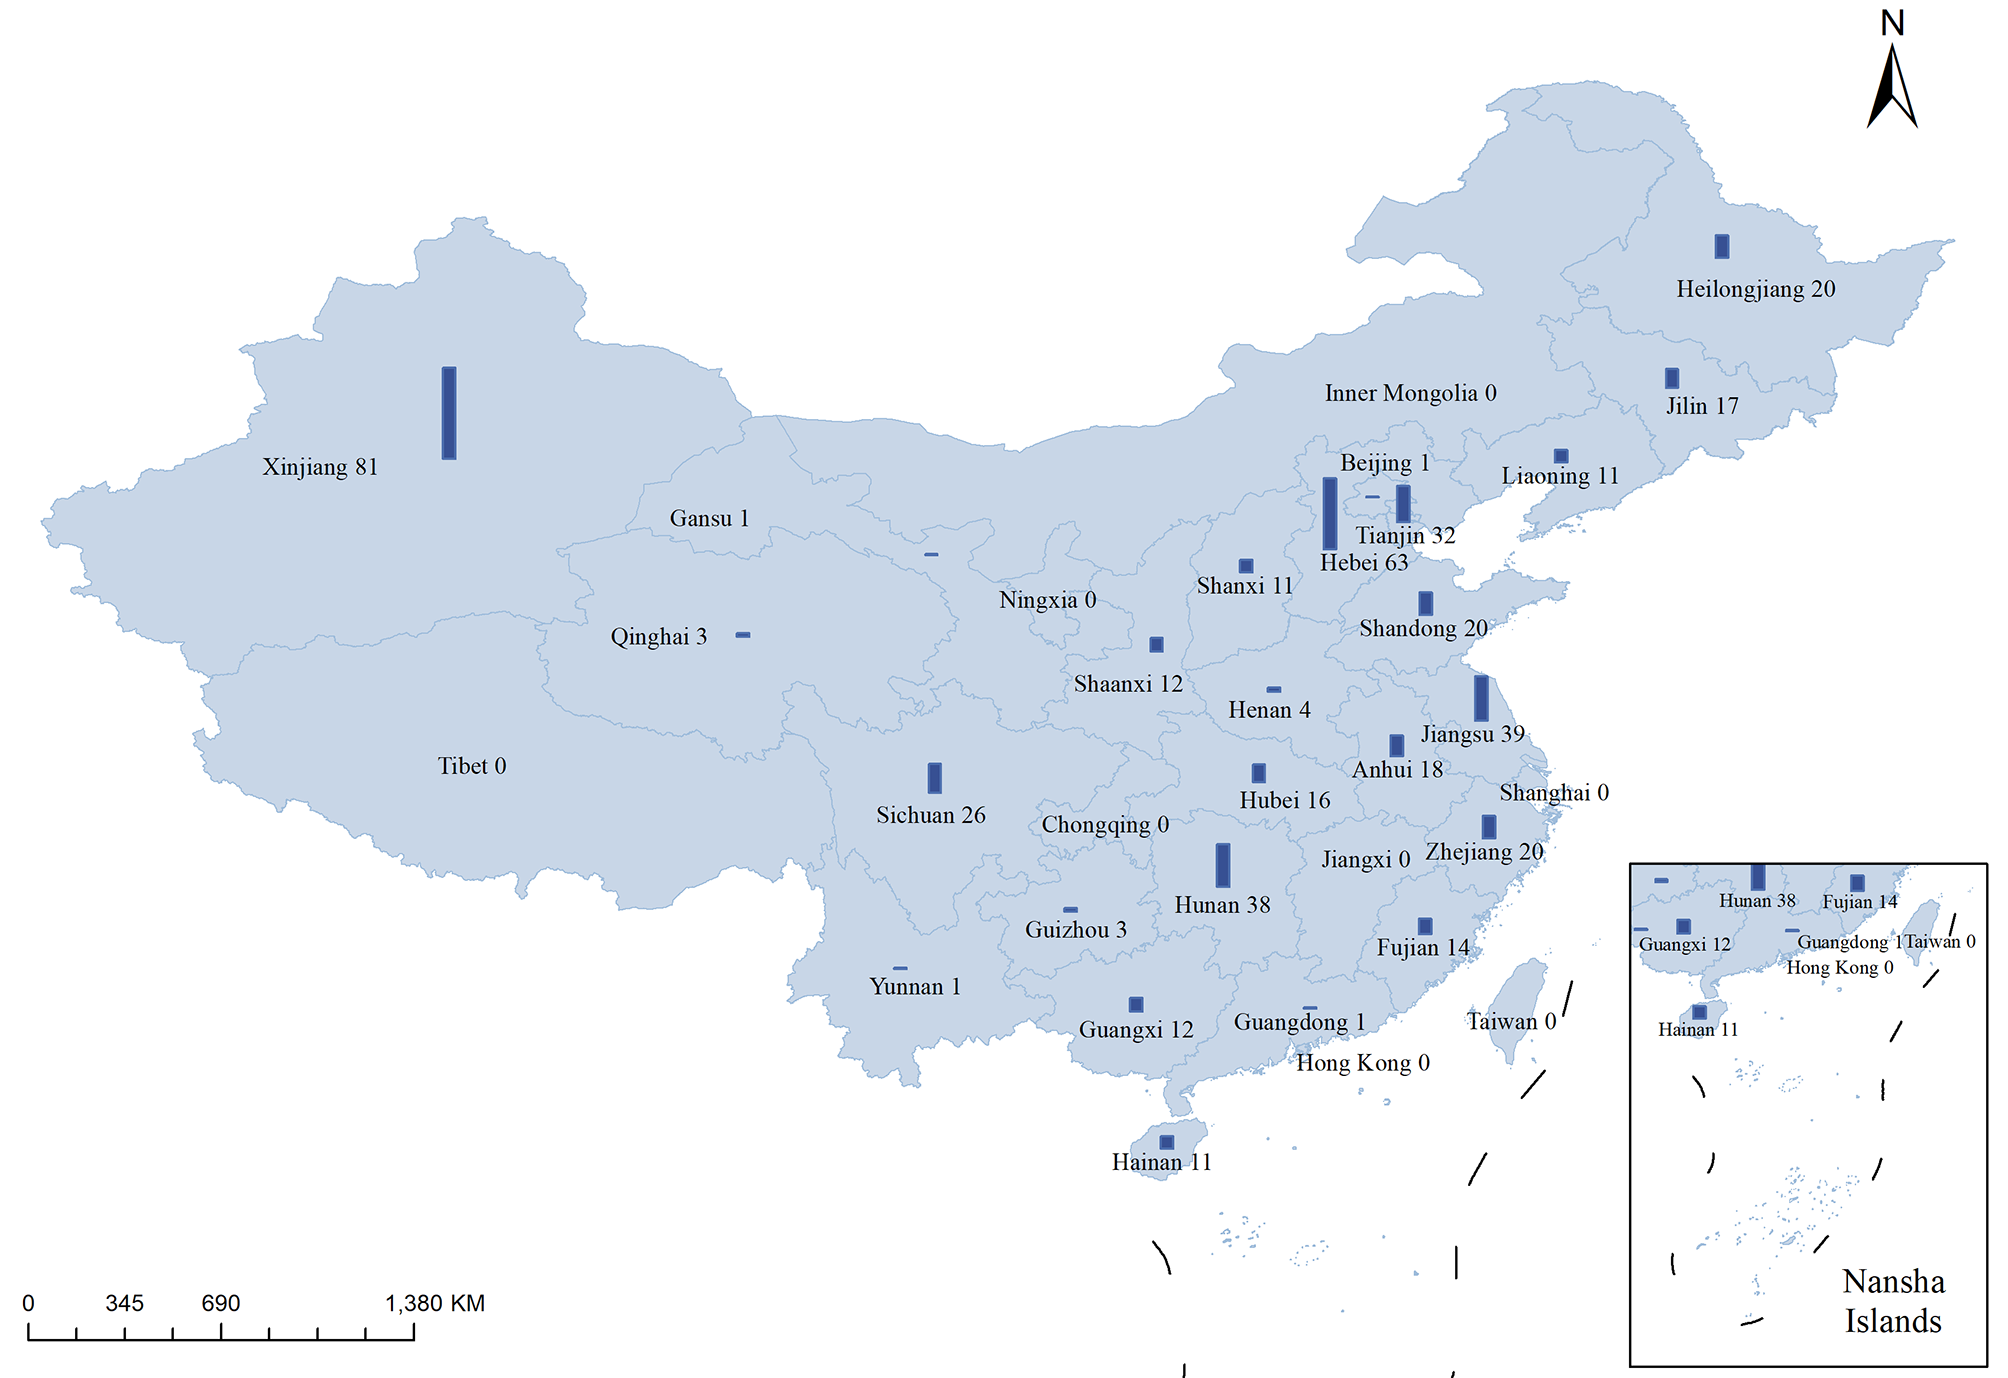 Prevalence and genetic basis of Mycobacterium tuberculosis resistance to pretomanid in China